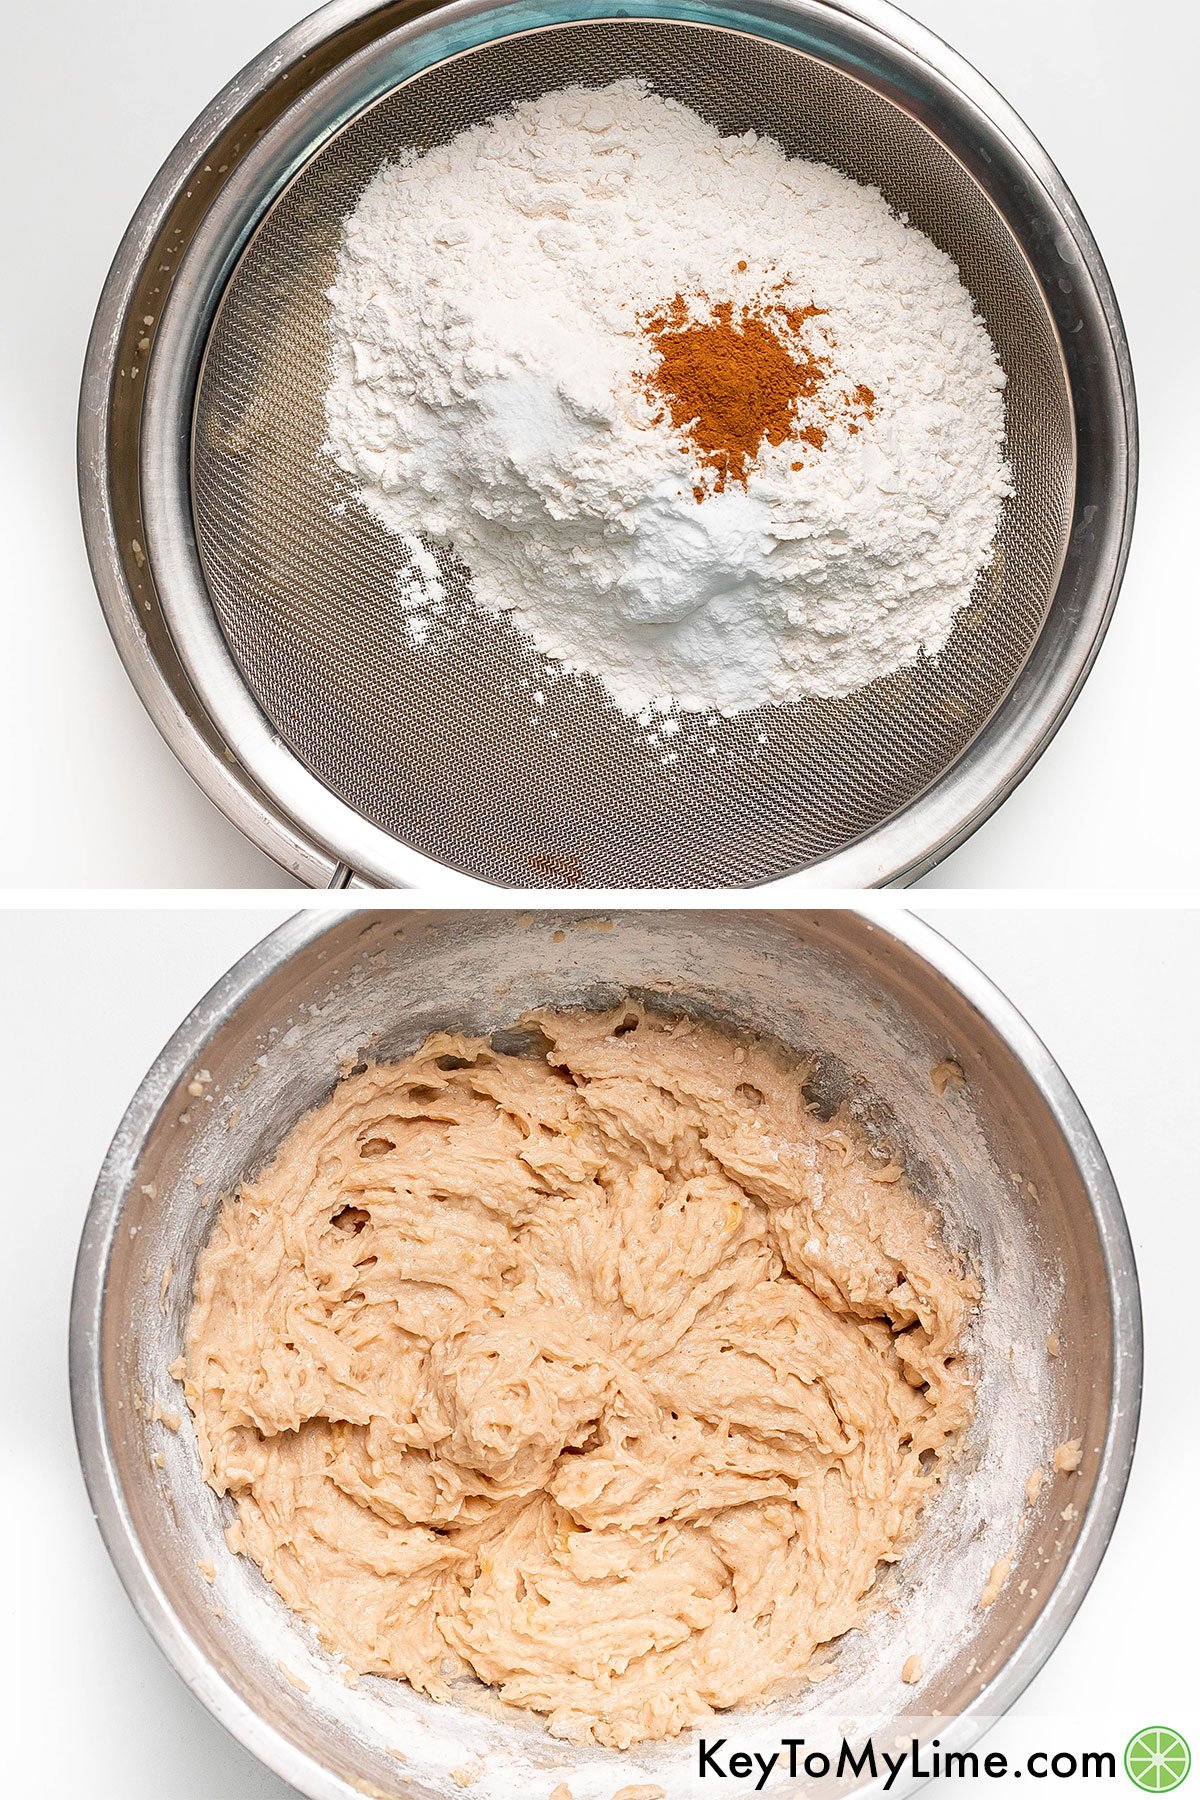 Sifting the flour, baking soda, salt and cinnamon into the wet ingredients and beating until just incorporated in a large mixing bowl.